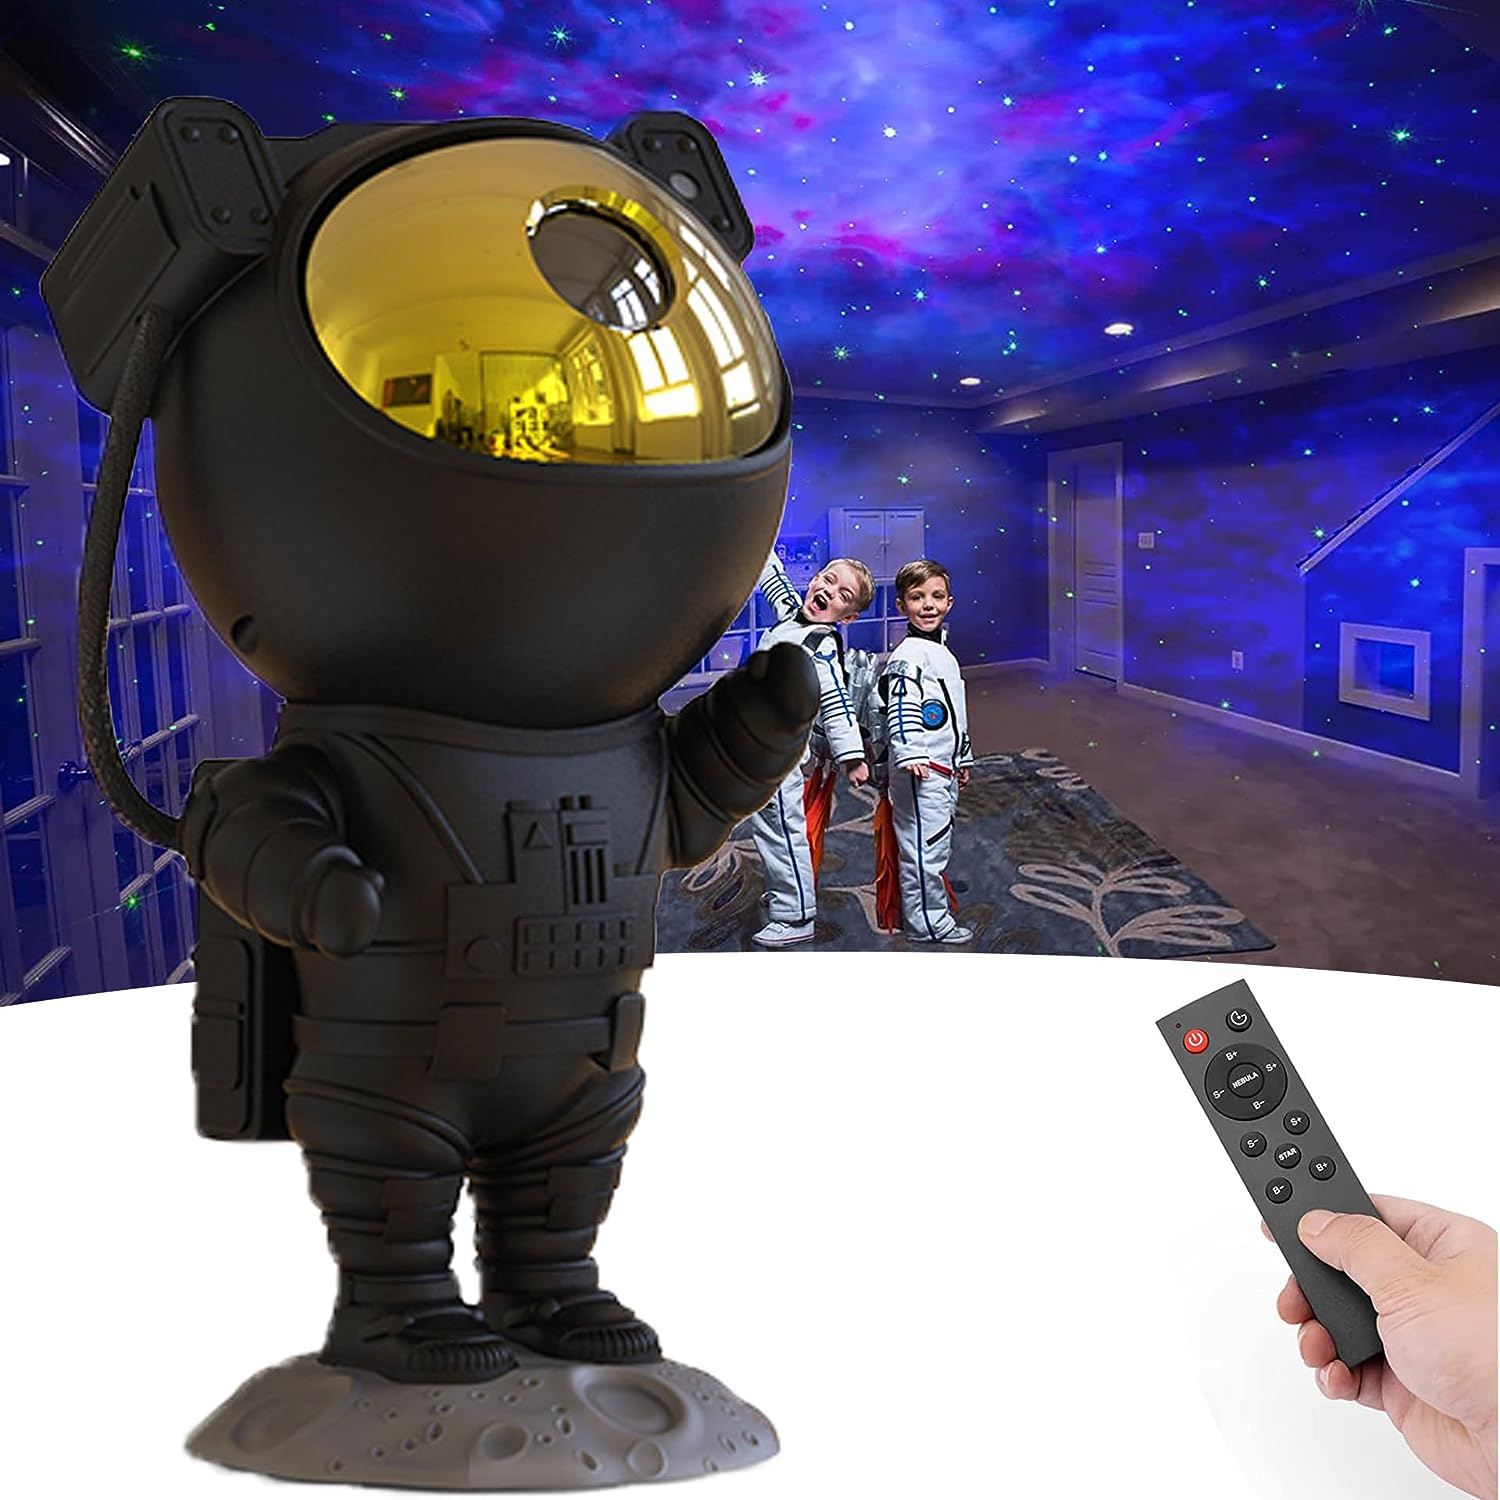 Night Light Projector Starry Astronaut LED Projection Lamp with Remote Control (Black, Gold) for Kids Adults Home Party Ceiling Decor Christmas Gift